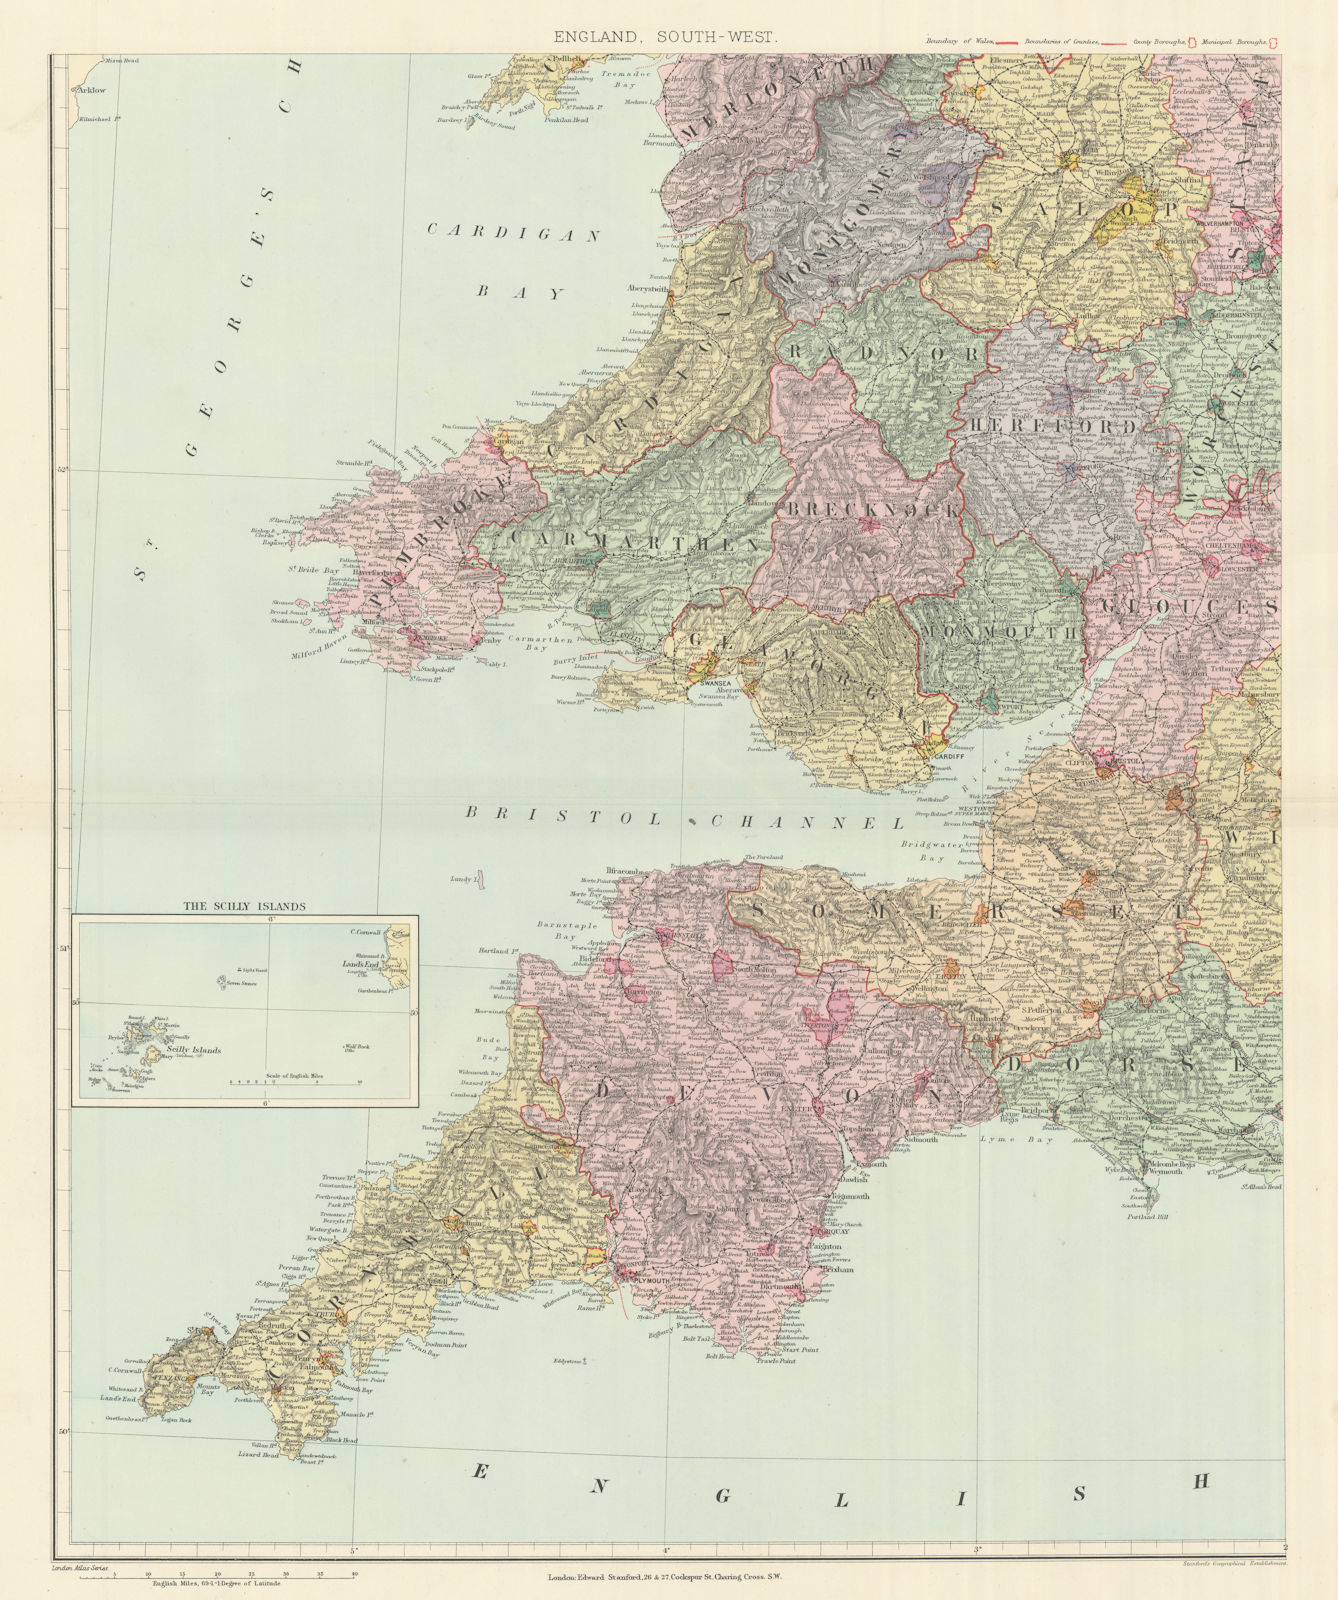 South Wales & S. West England. Devon Cornwall Somerset 62x51cm STANFORD 1894 map